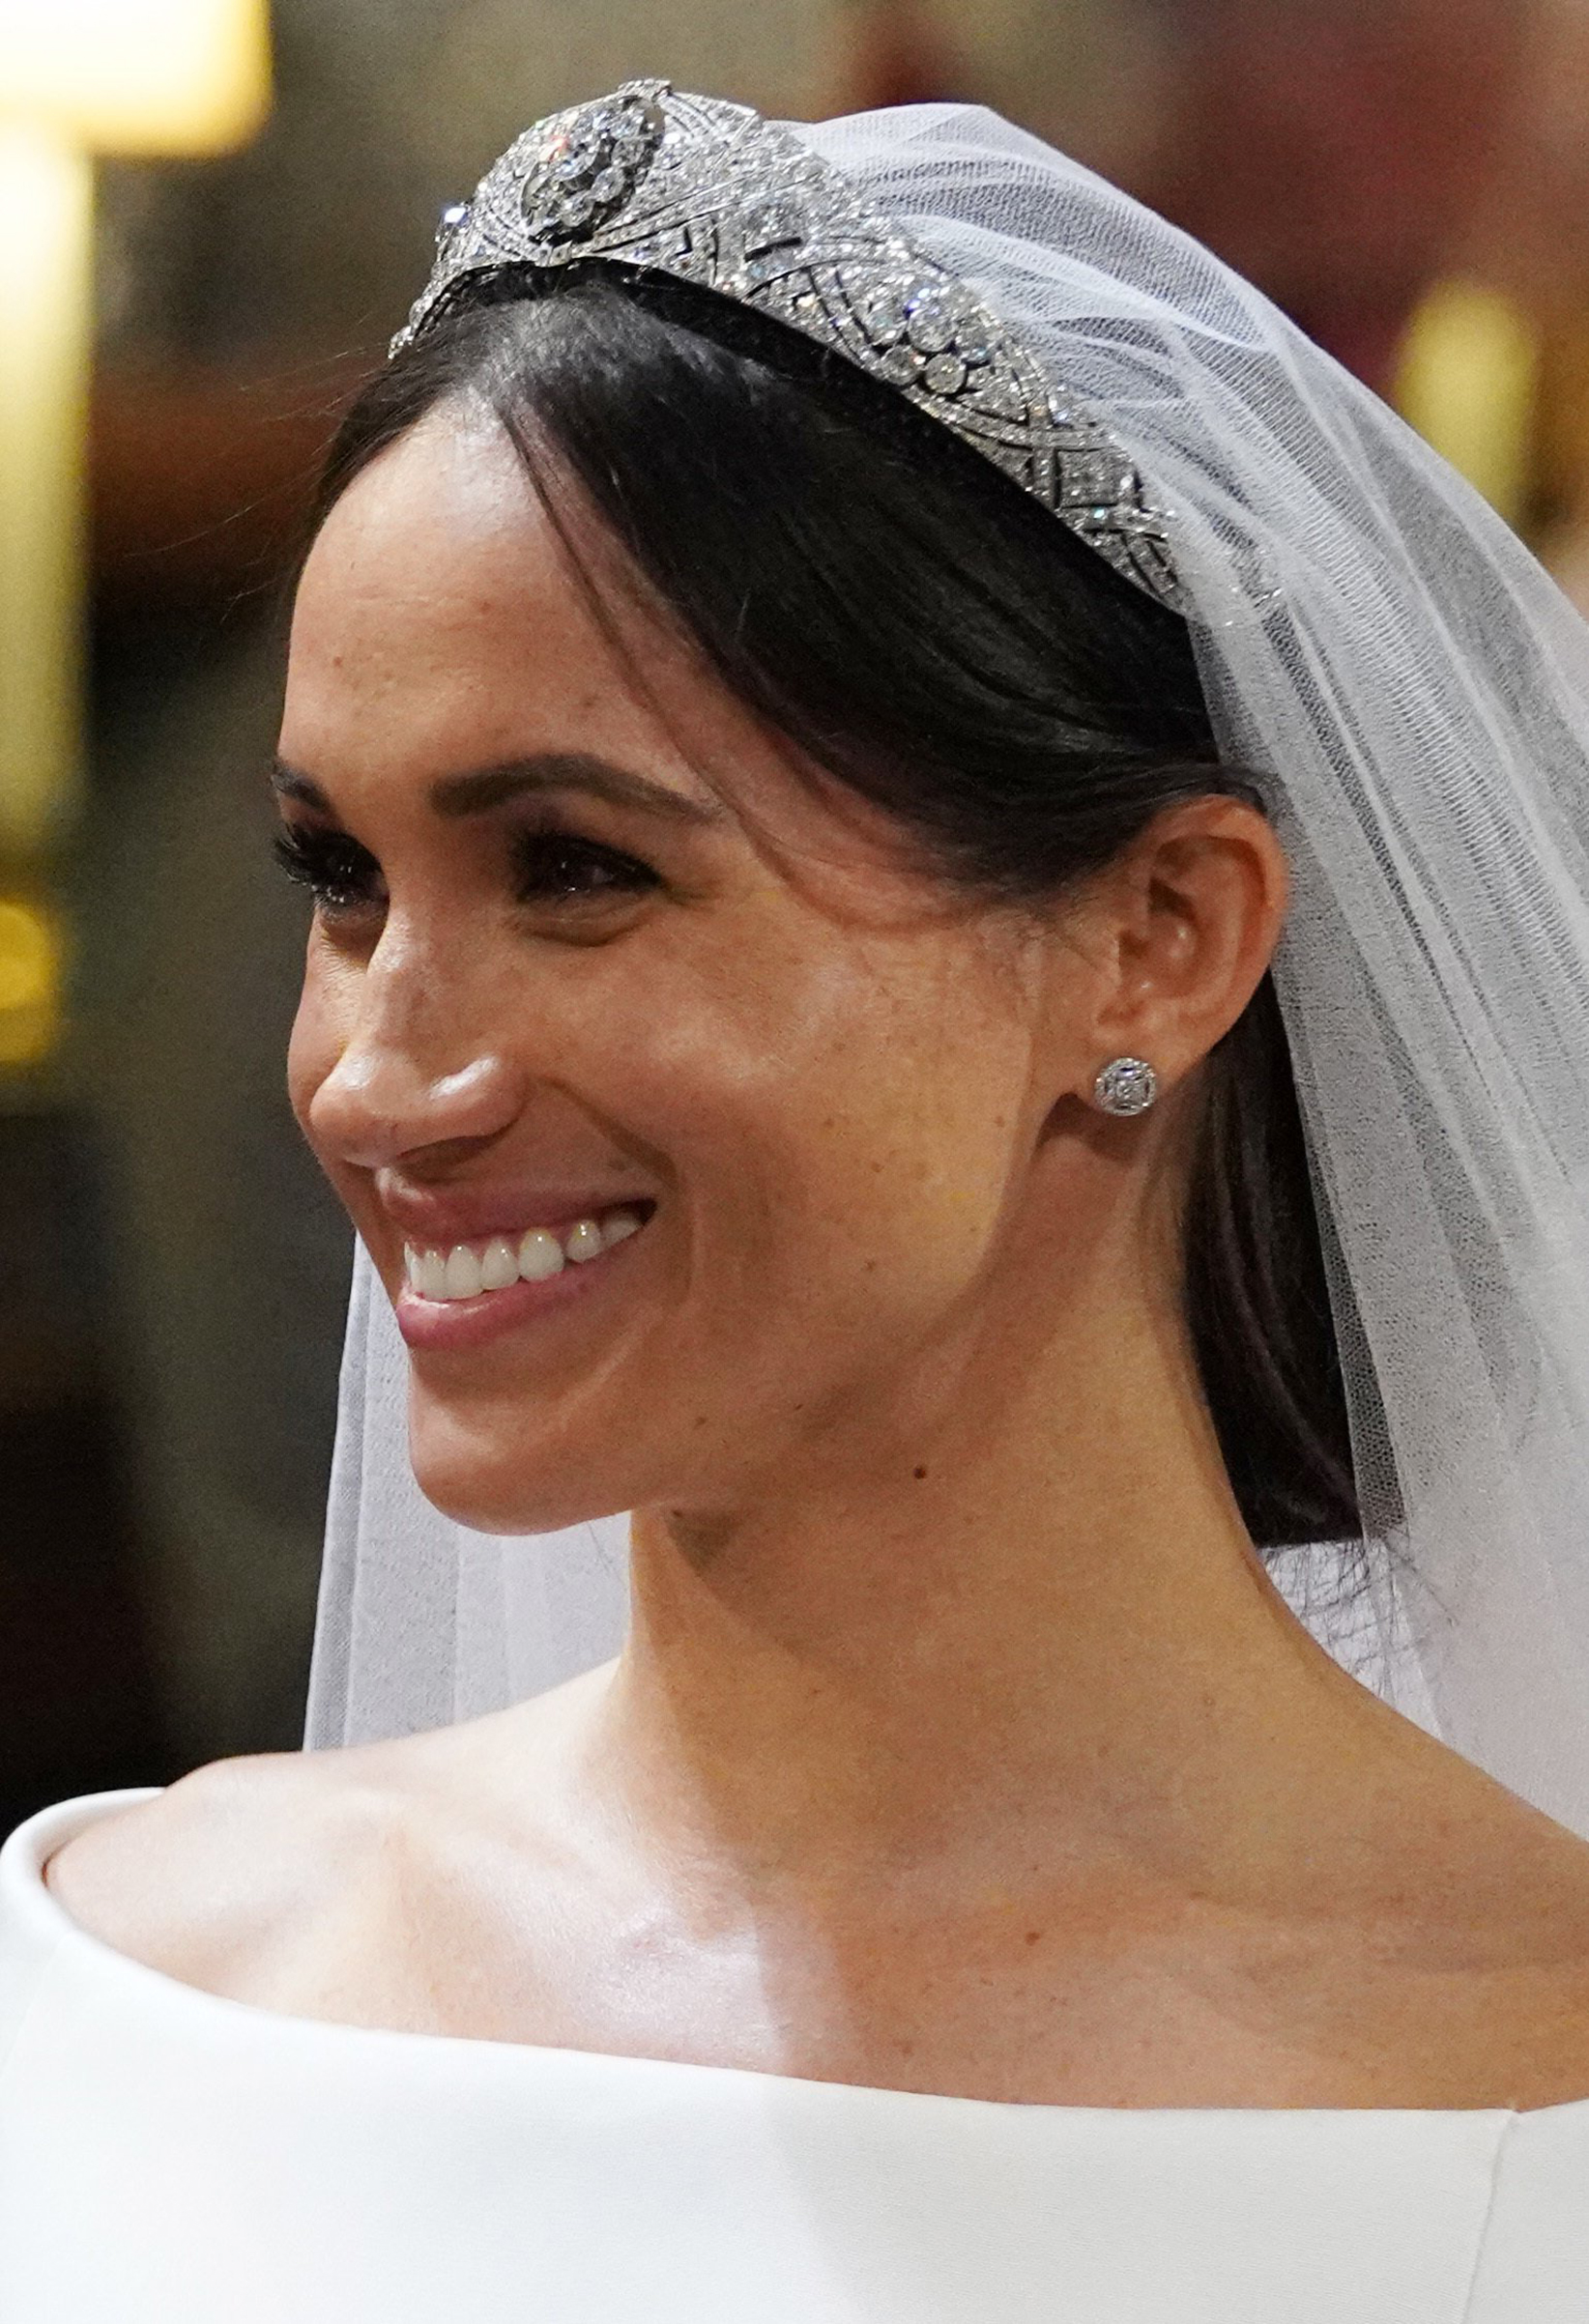 Meghan Markle in St George's Chapel at Windsor Castle during her wedding to Prince Harry, May 19, 2018. (Jonathan —PA Wire)